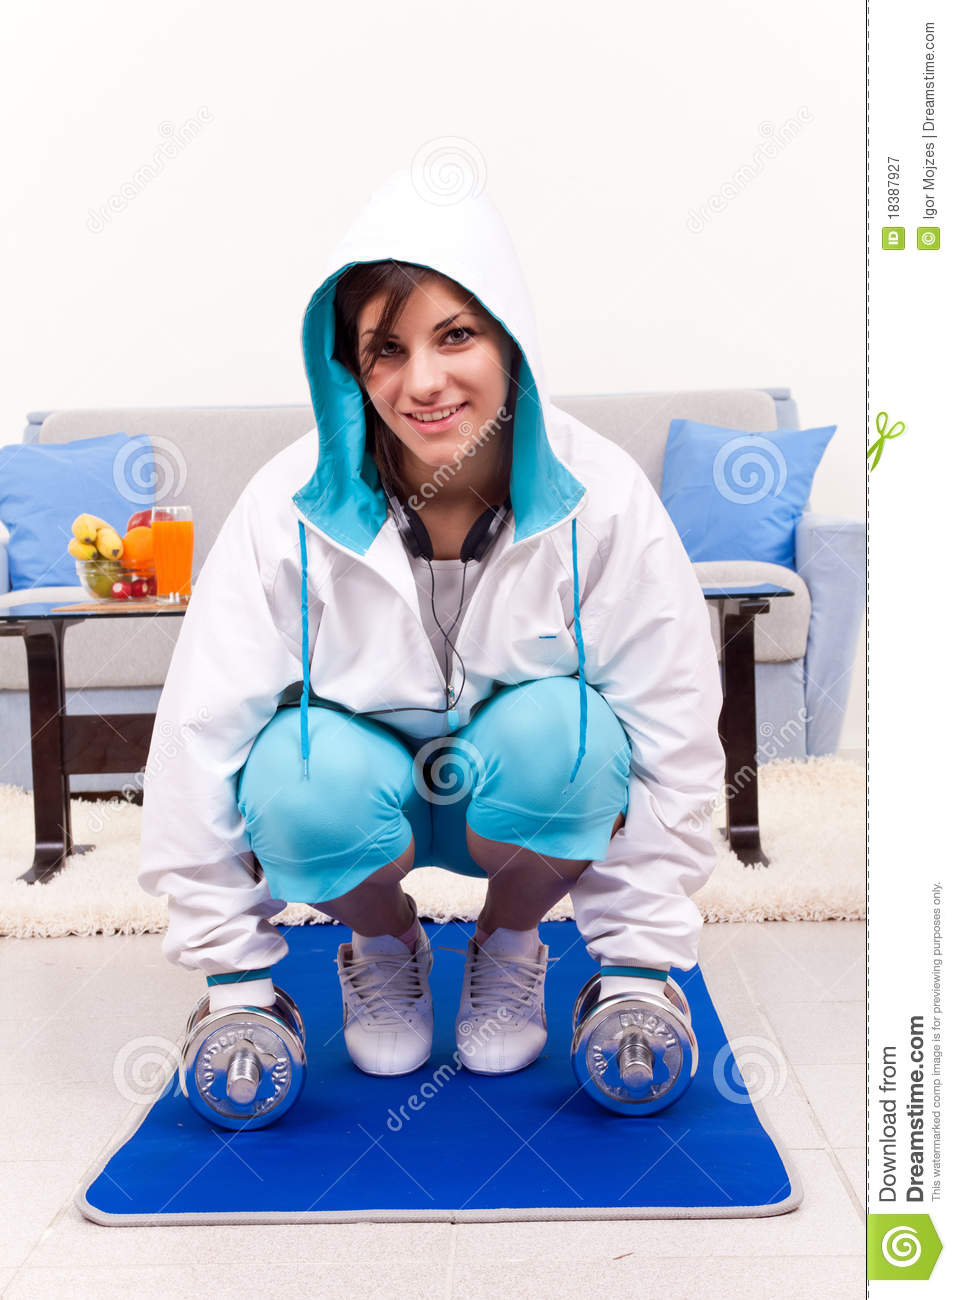 Girl In Sportwear Lifting Weights Royalty Free Stock Photography